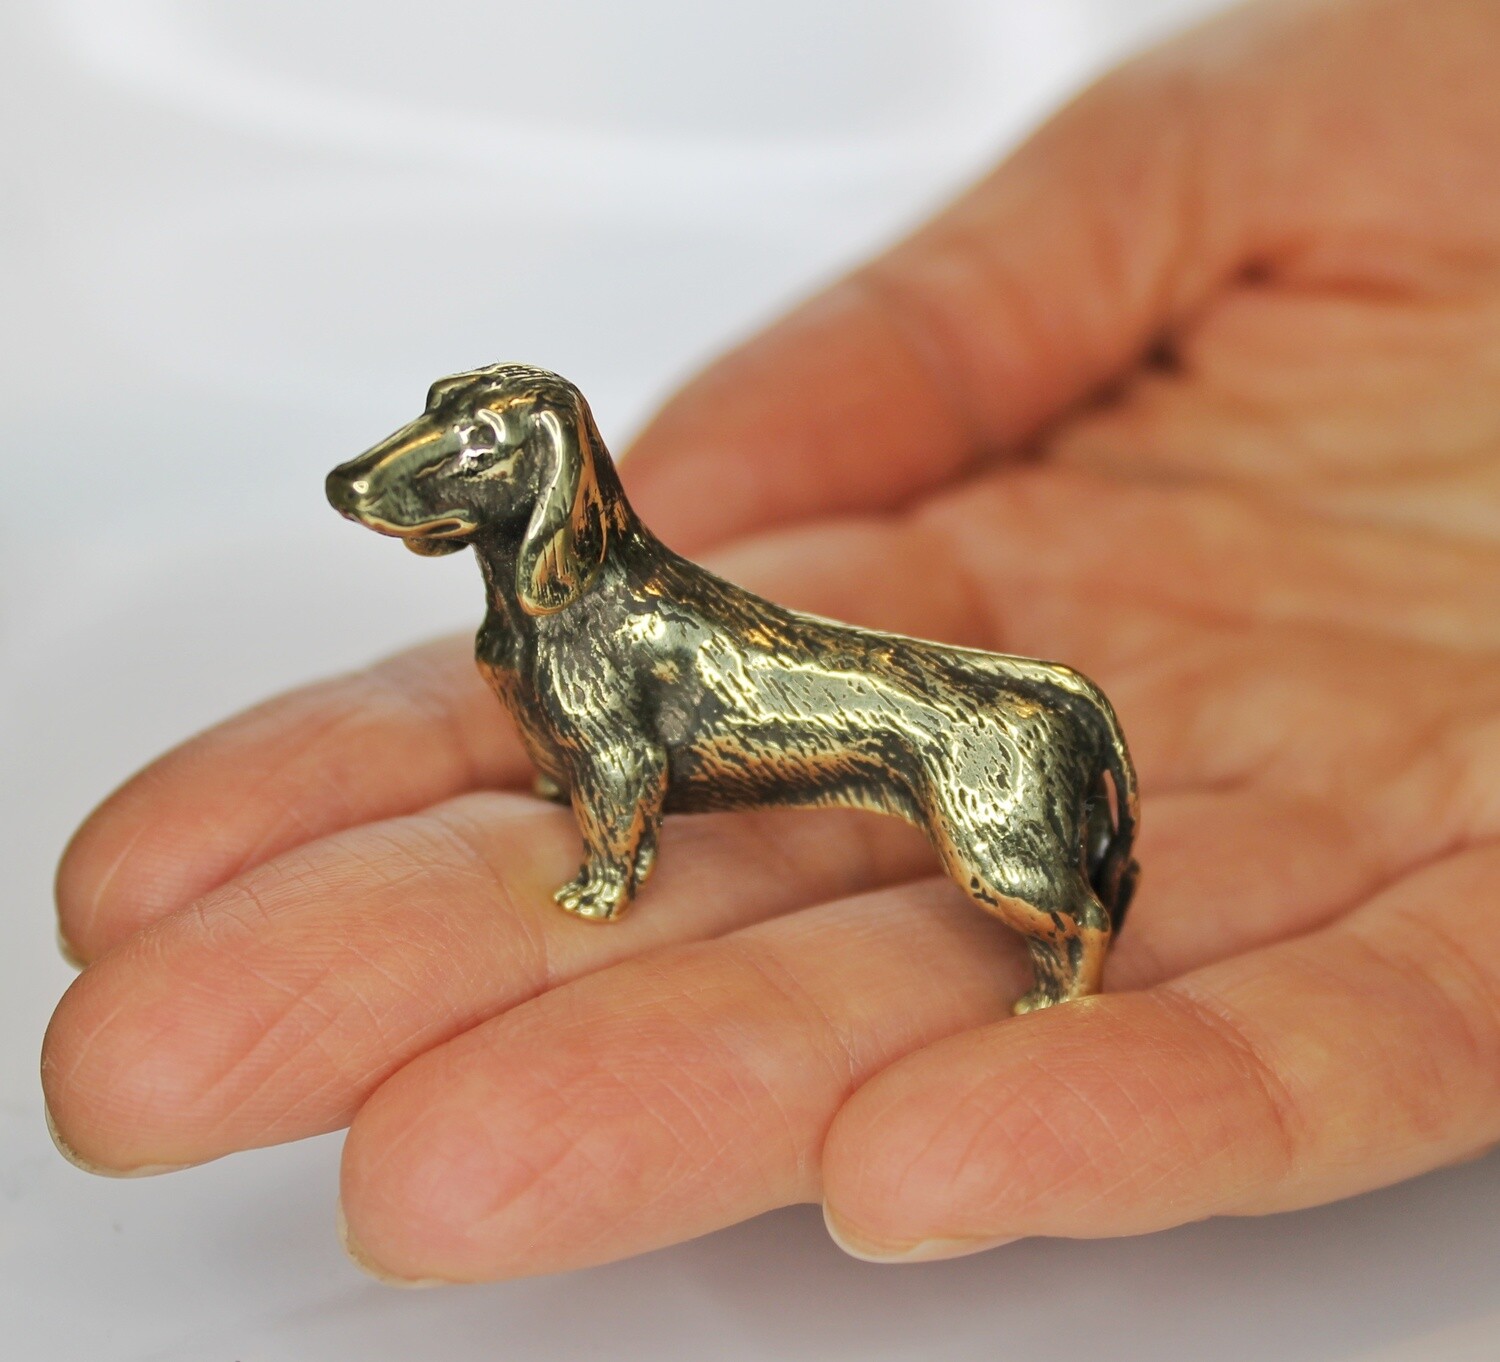 Details about   Solid Brass Amber Figurine of lazy Dachshund on a pillow Dog IronWork 